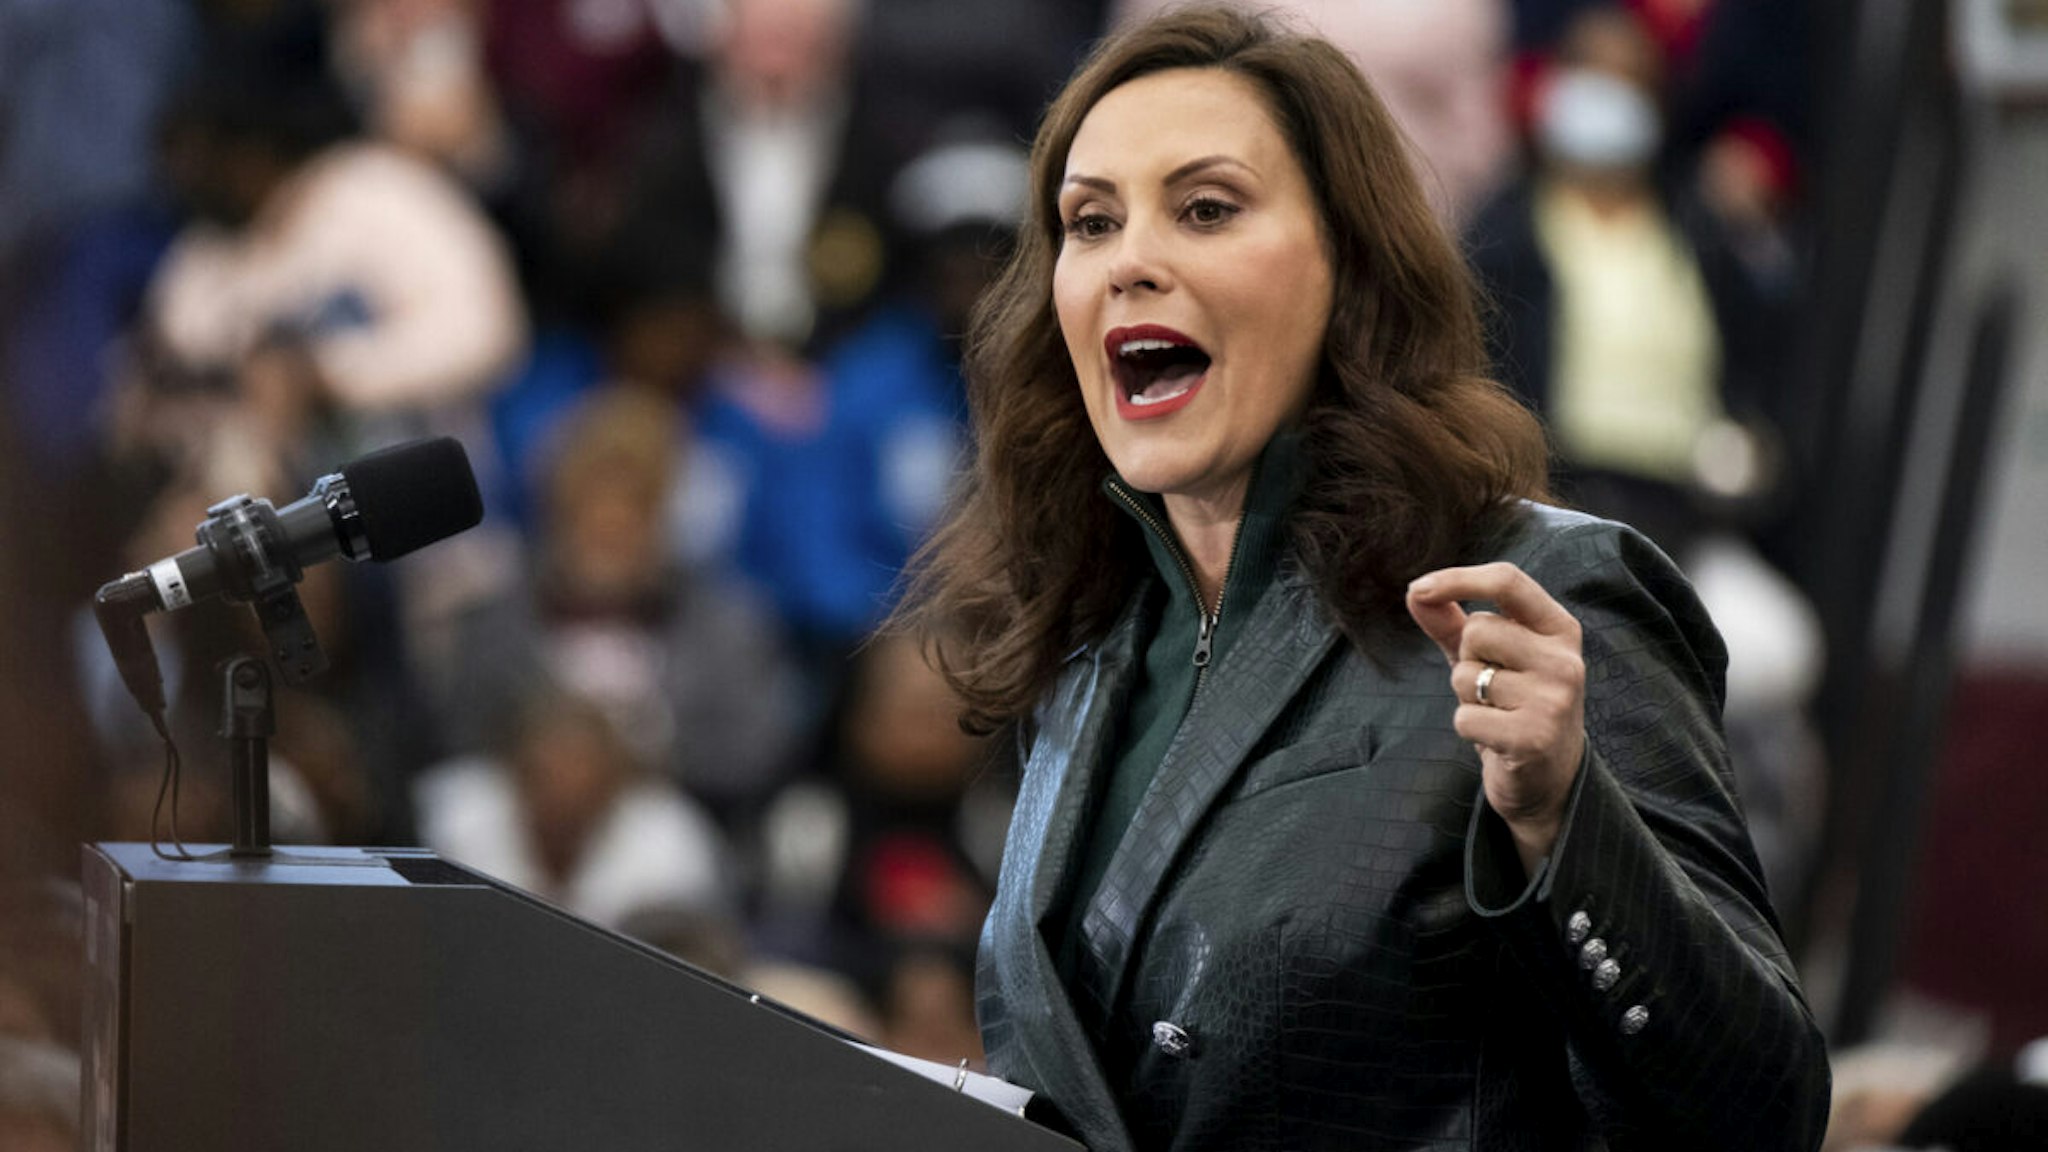 Michigan Governor Gretchen Whitmer speaks to a crowd at Renaissance High School during a campaign rally for Michigan Democrats ahead of the midterm elections on October 29, 2022 in Detroit, Michigan